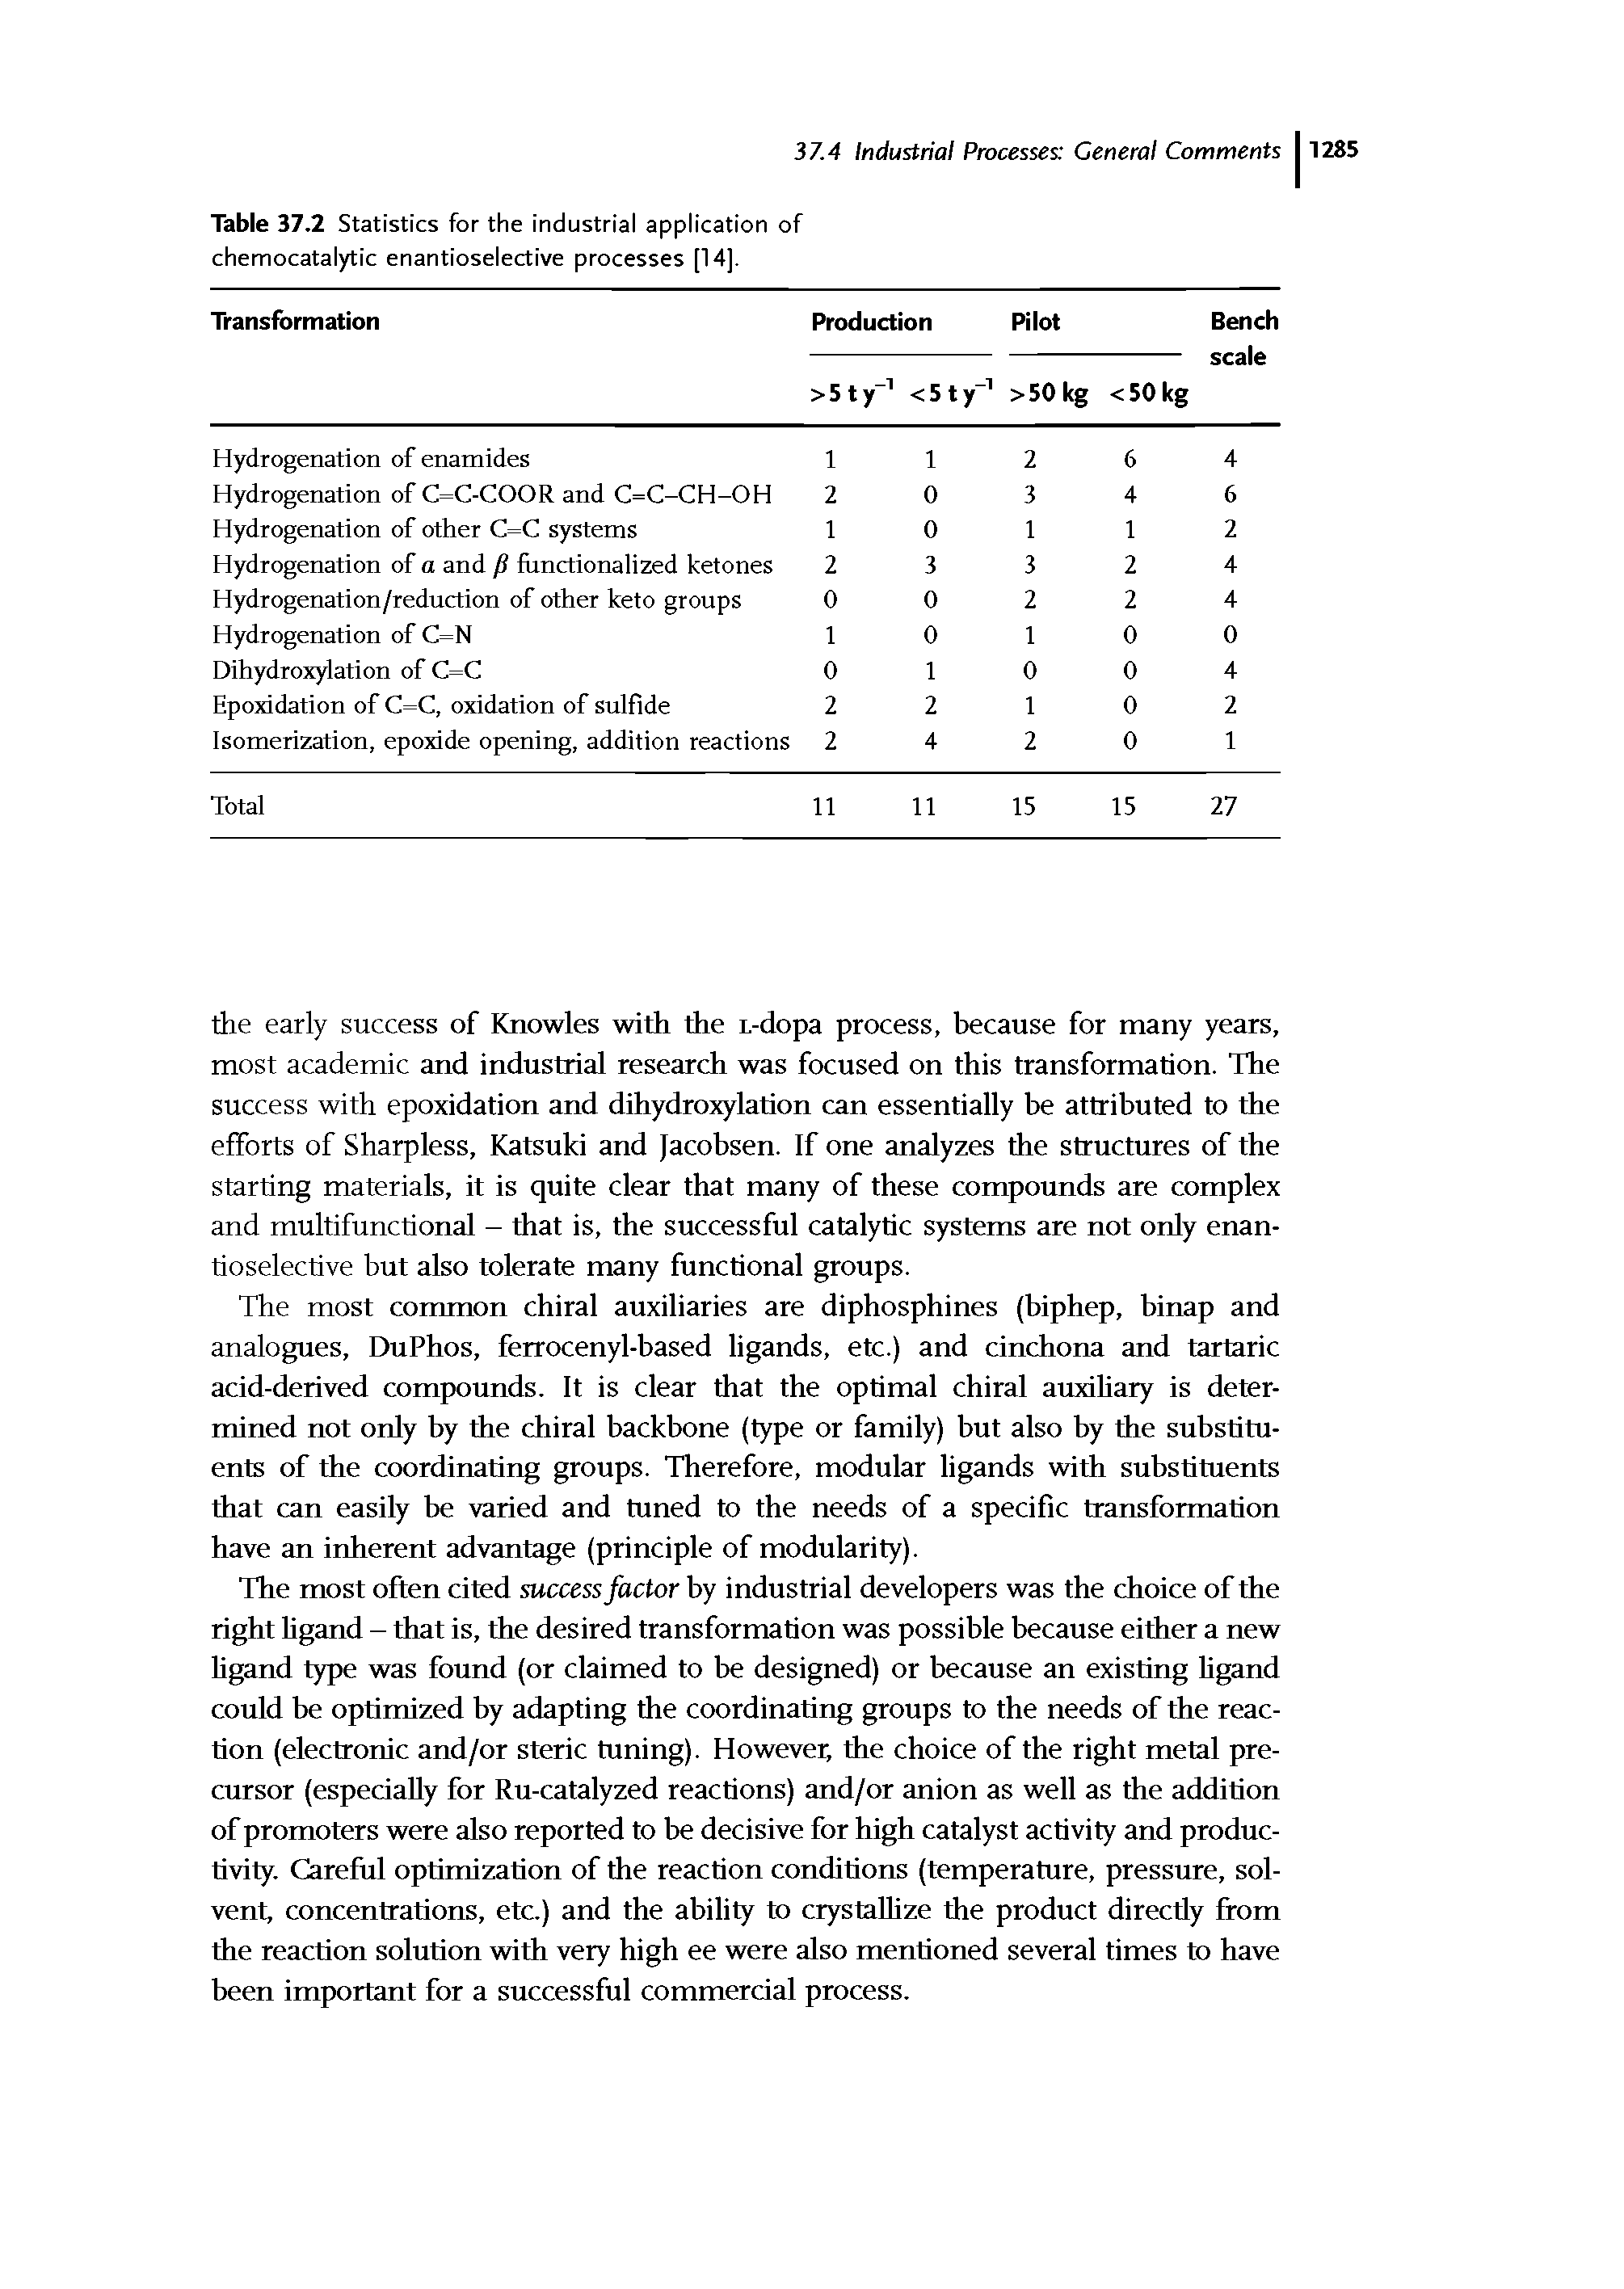 Table 37.2 Statistics for the industrial application of chemocatalytic enantioselective processes [14].